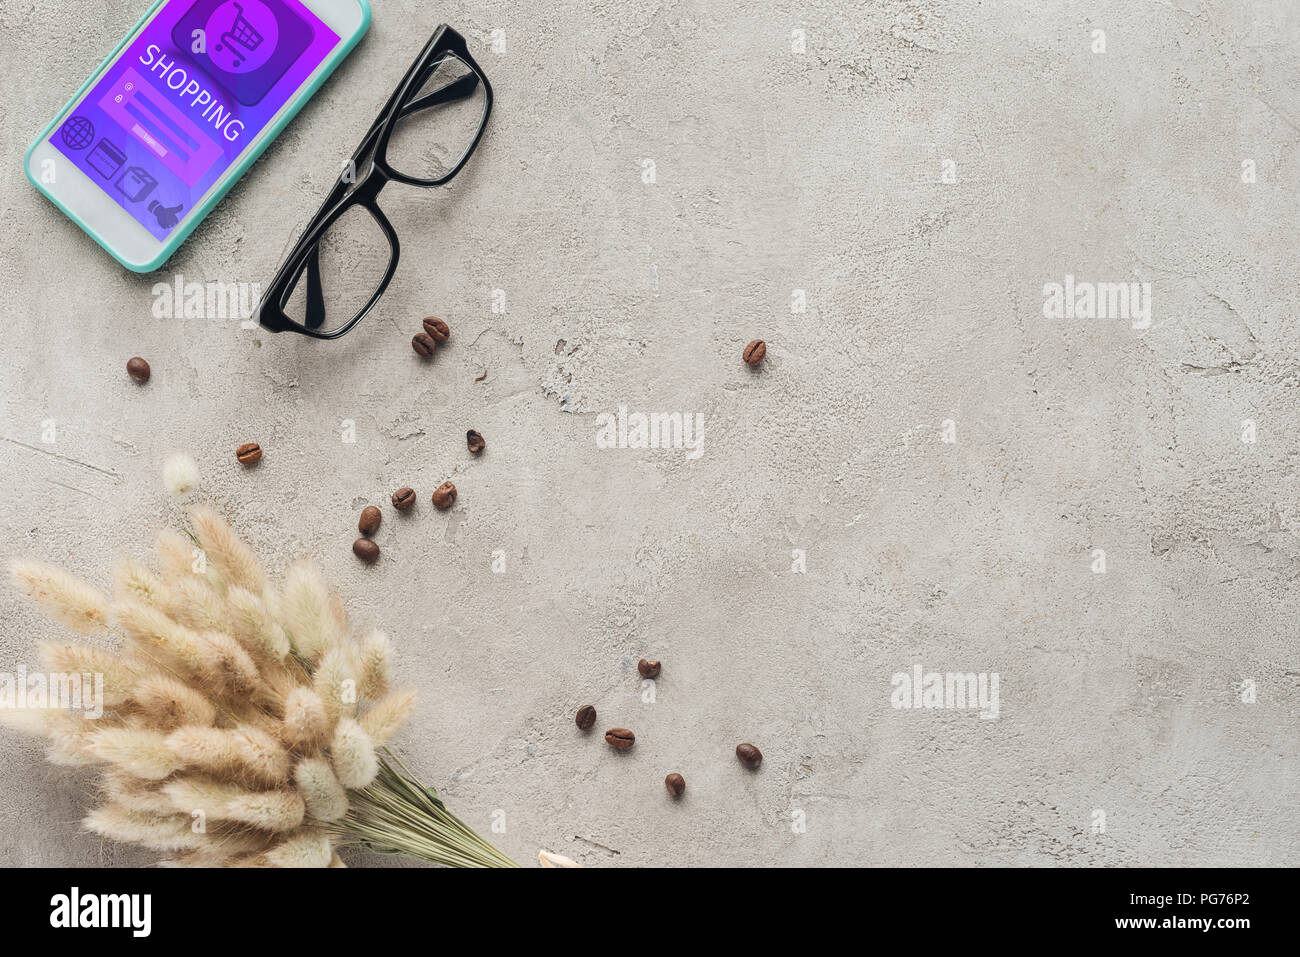 top view of smartphone with shopping app on screen with eyeglasses, spilled coffee beans and lagurus ovatus bouquet on concrete surface Stock Photo